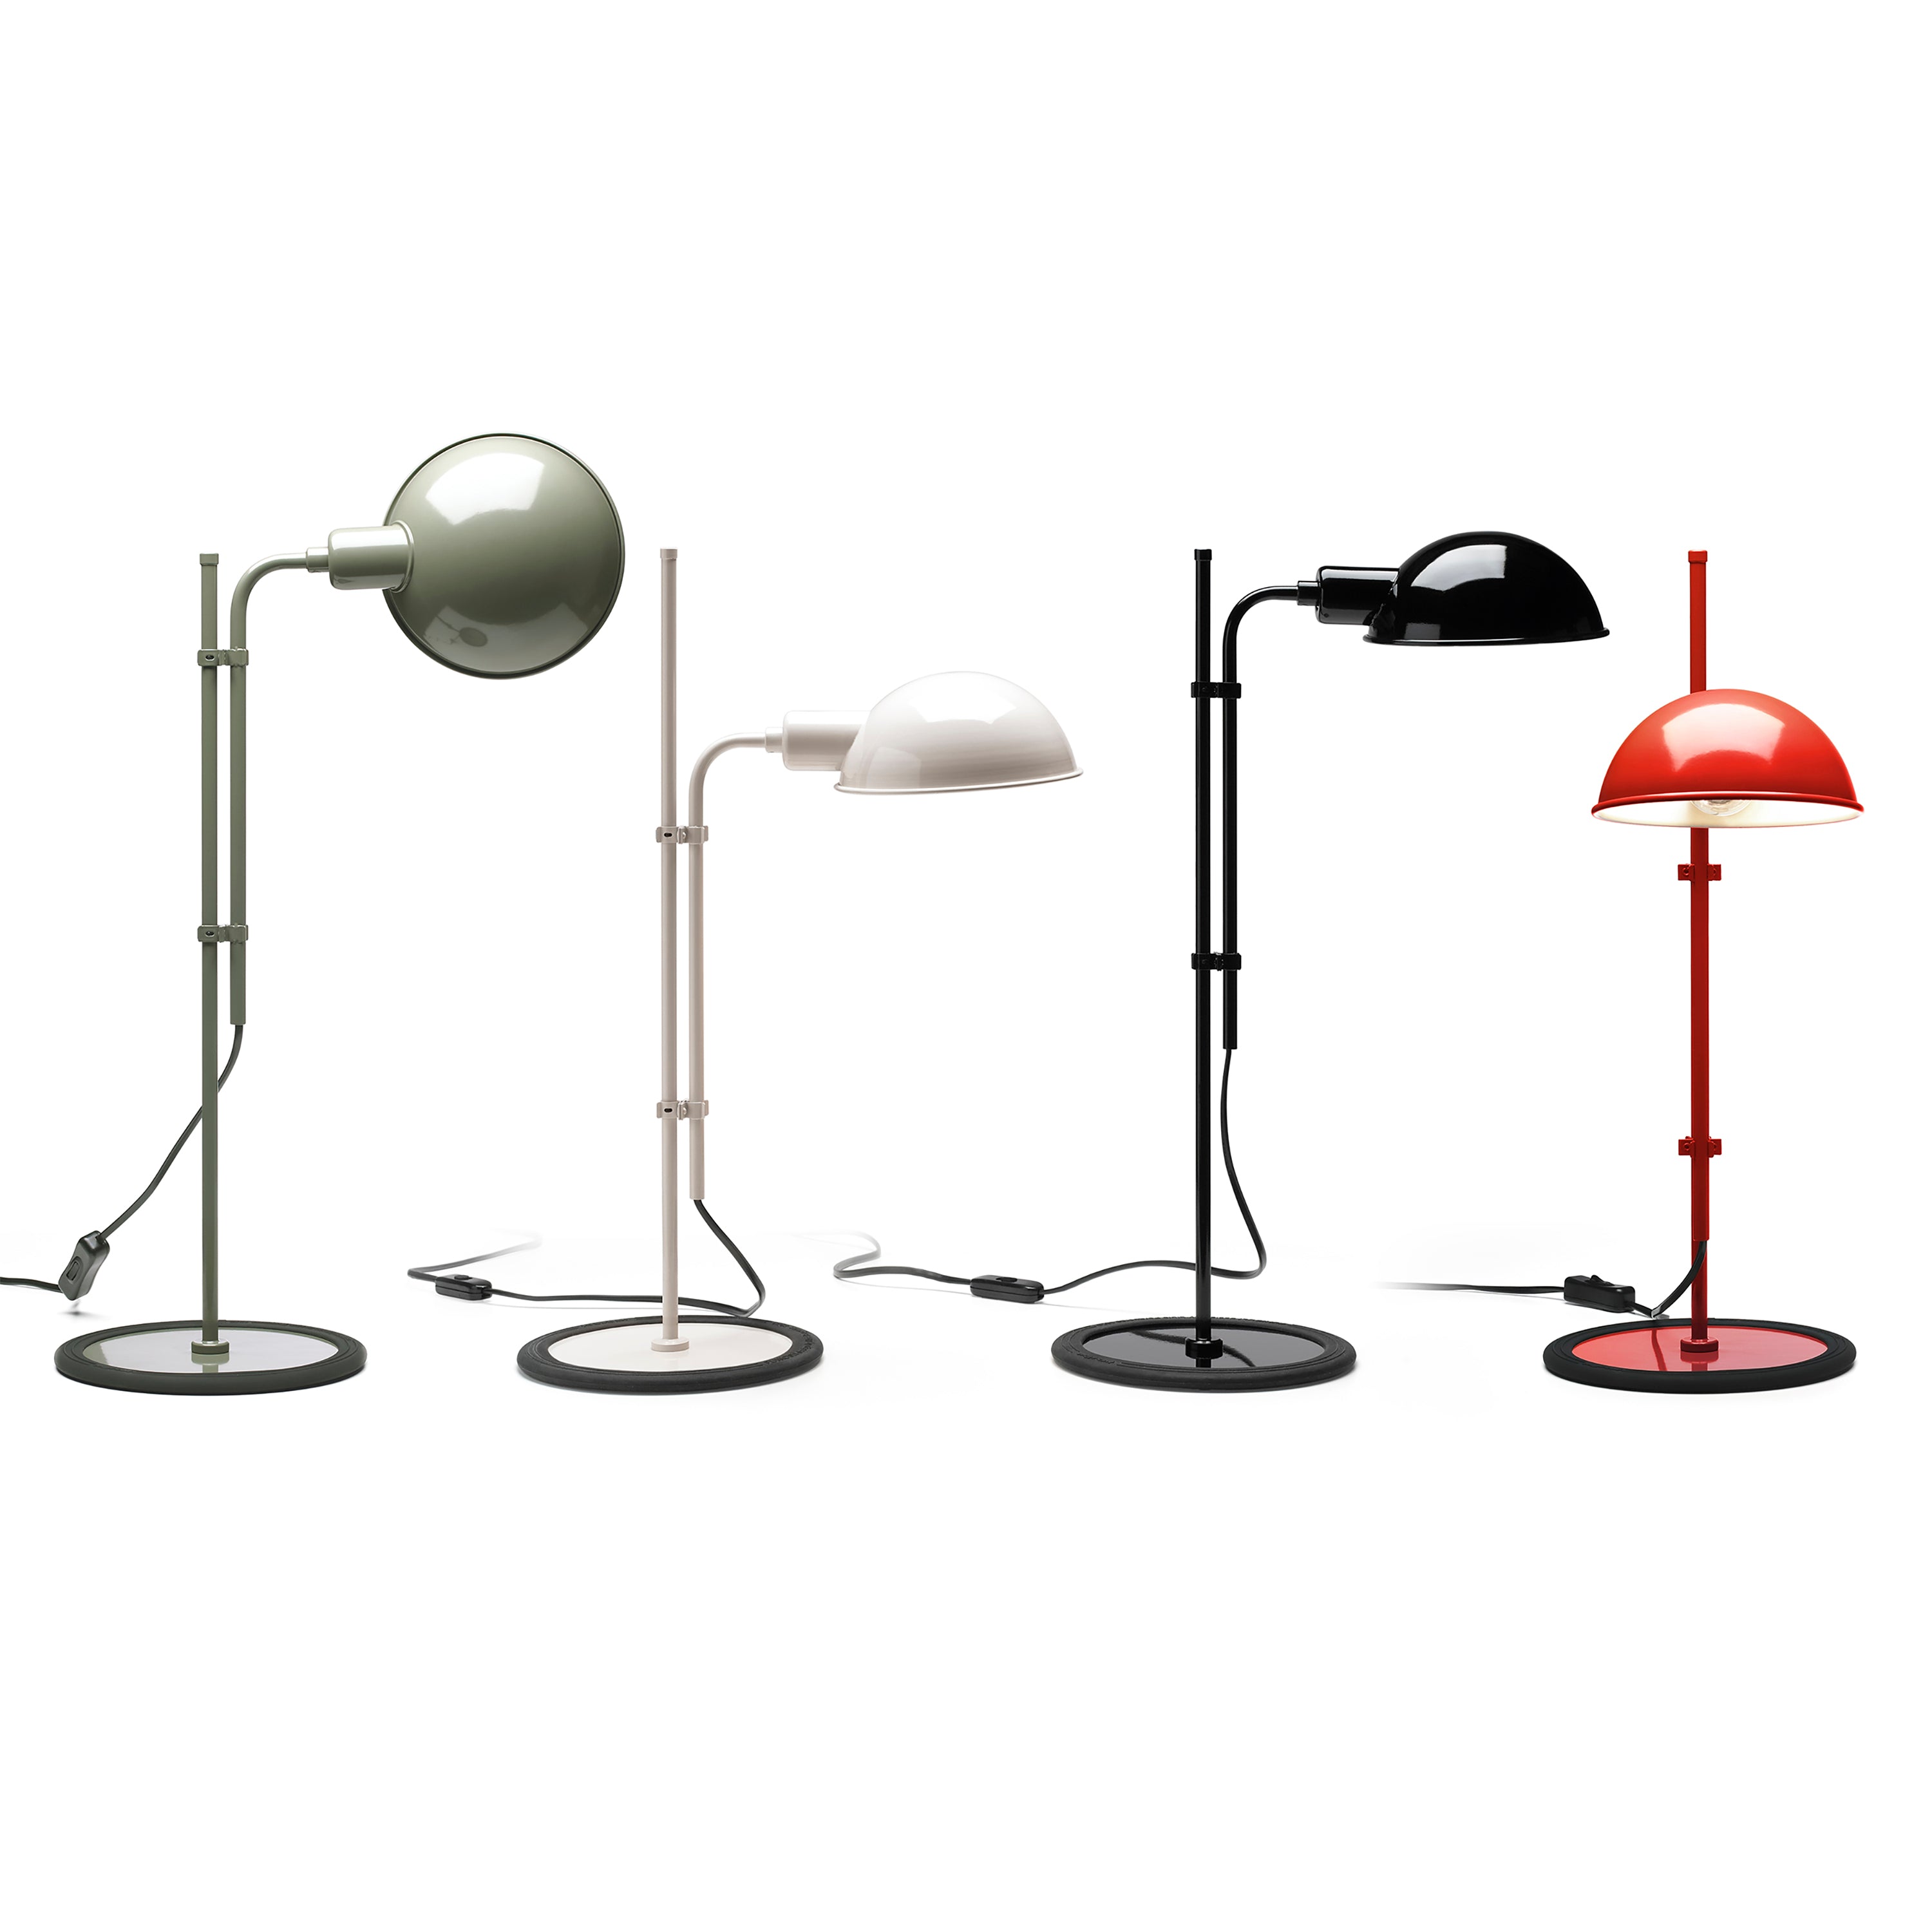 Funiculí S Table Lamp: Moss Grey + Off-White + Black + Terracotta